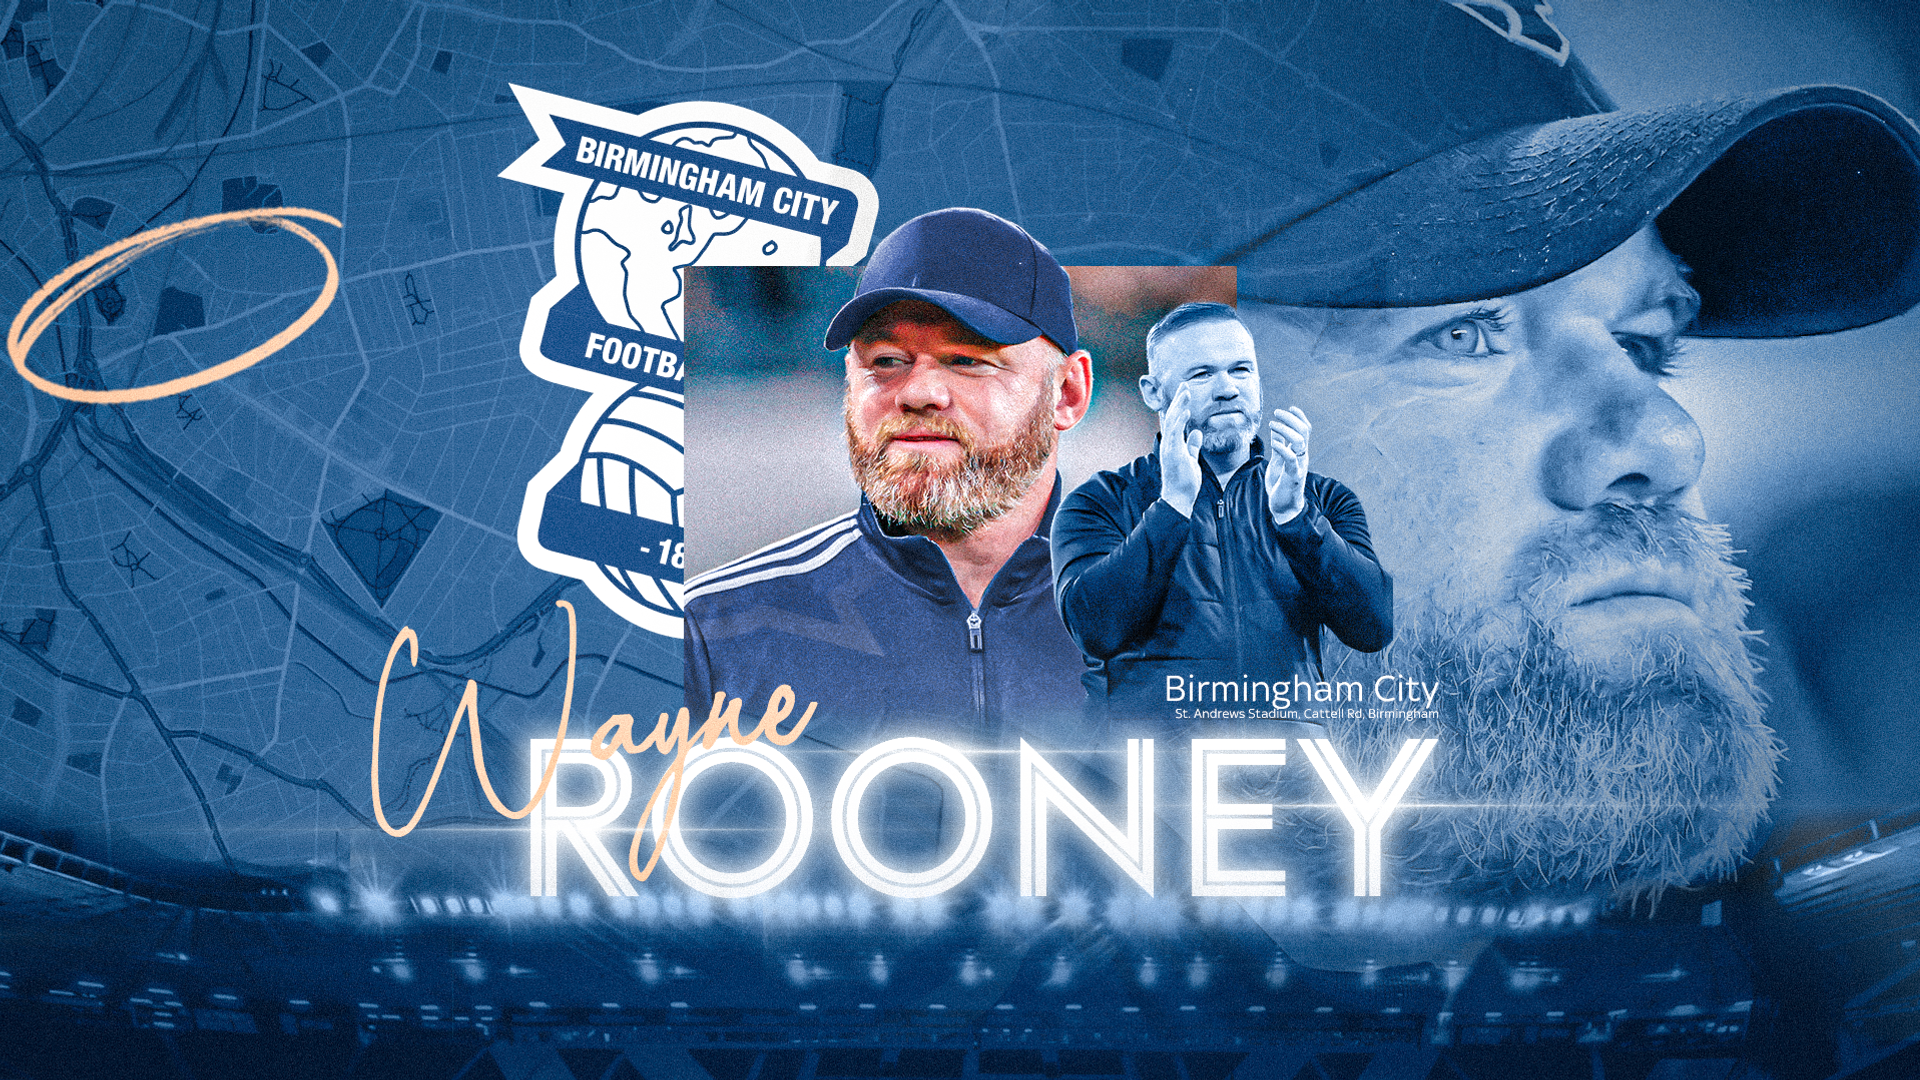 Birmingham appoint Rooney as manager